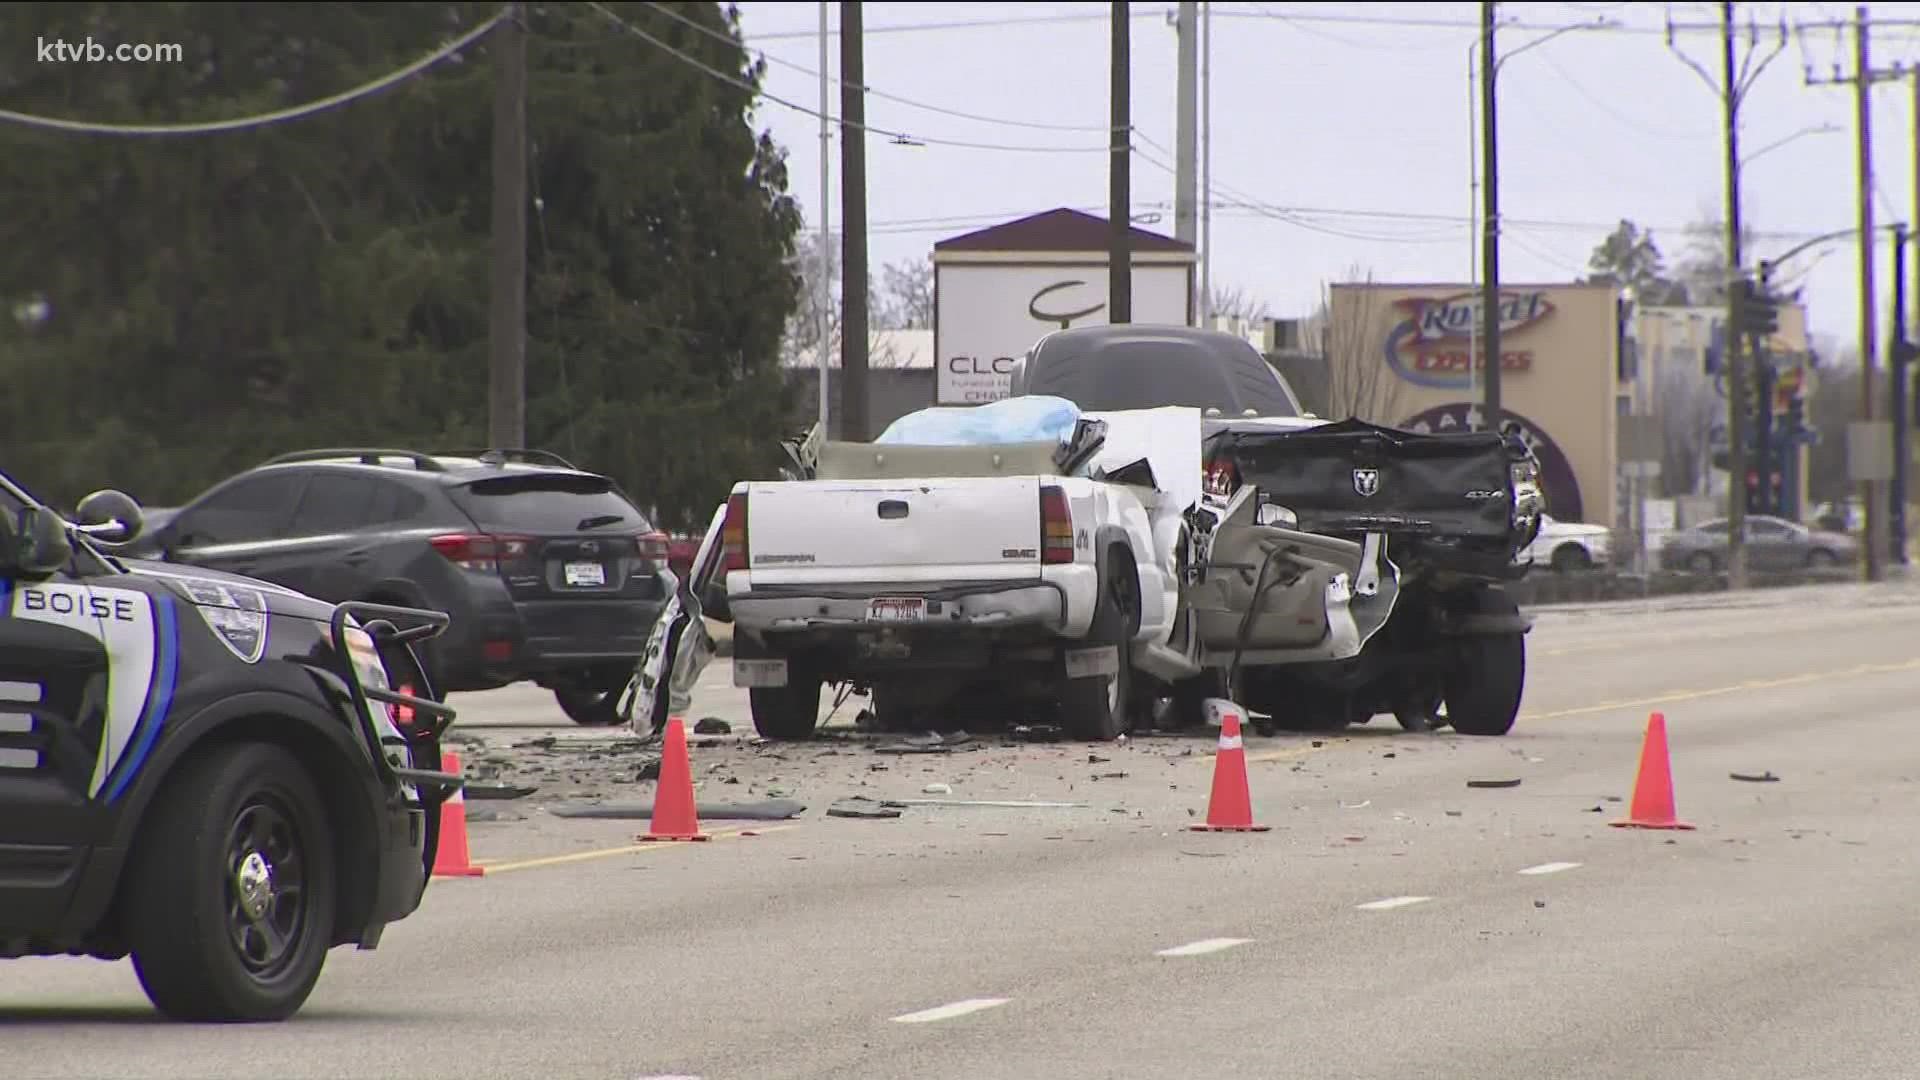 Boise Police report "significant injuries" in the crash, which occurred Tuesday afternoon near Cloverdale Road.